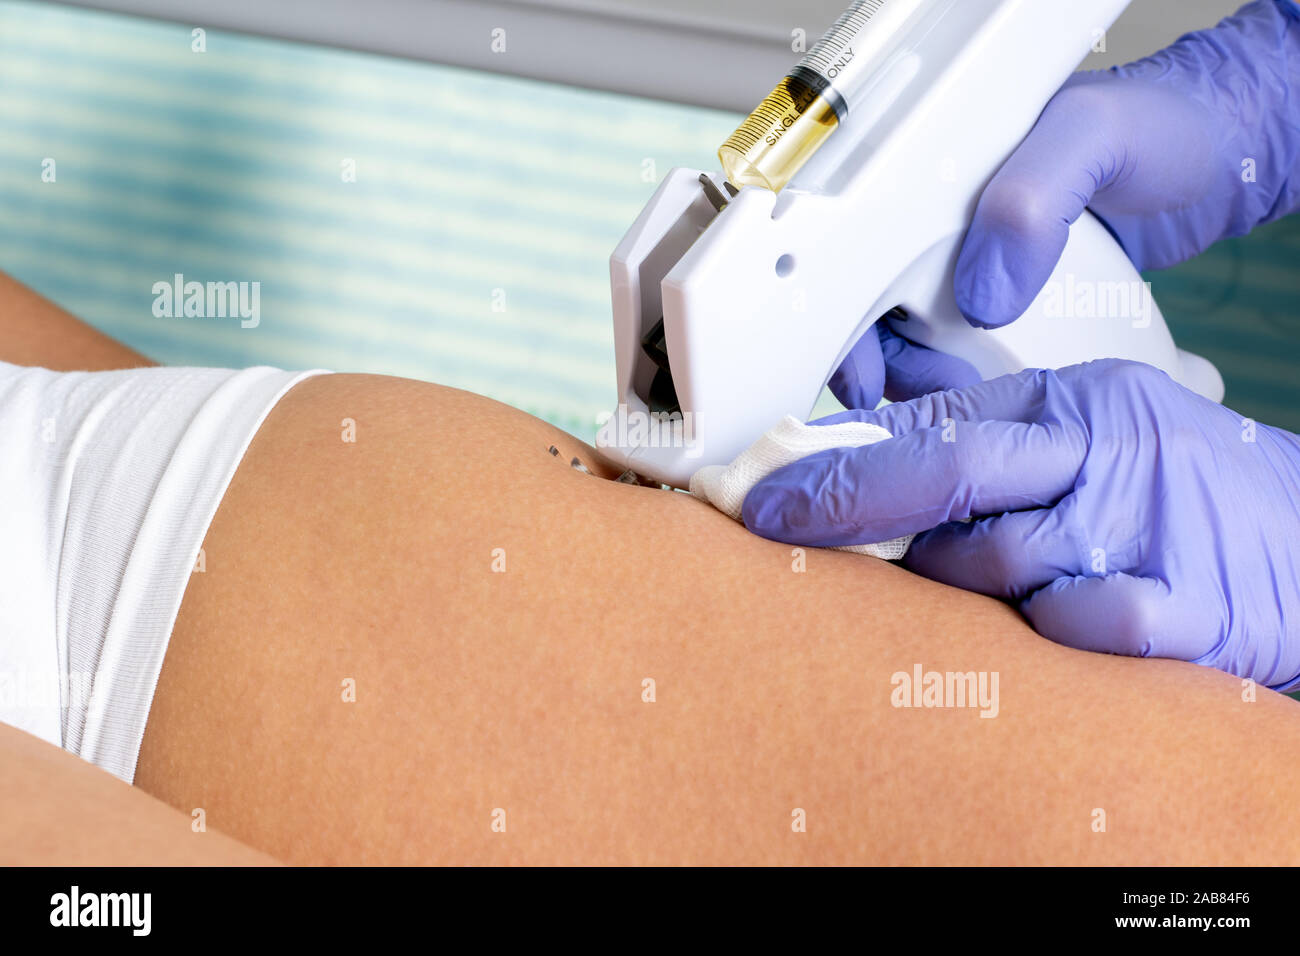 Extreme close up detail of therapist doing mesotherapy on female upper thigh with micro needle gun. Stock Photo